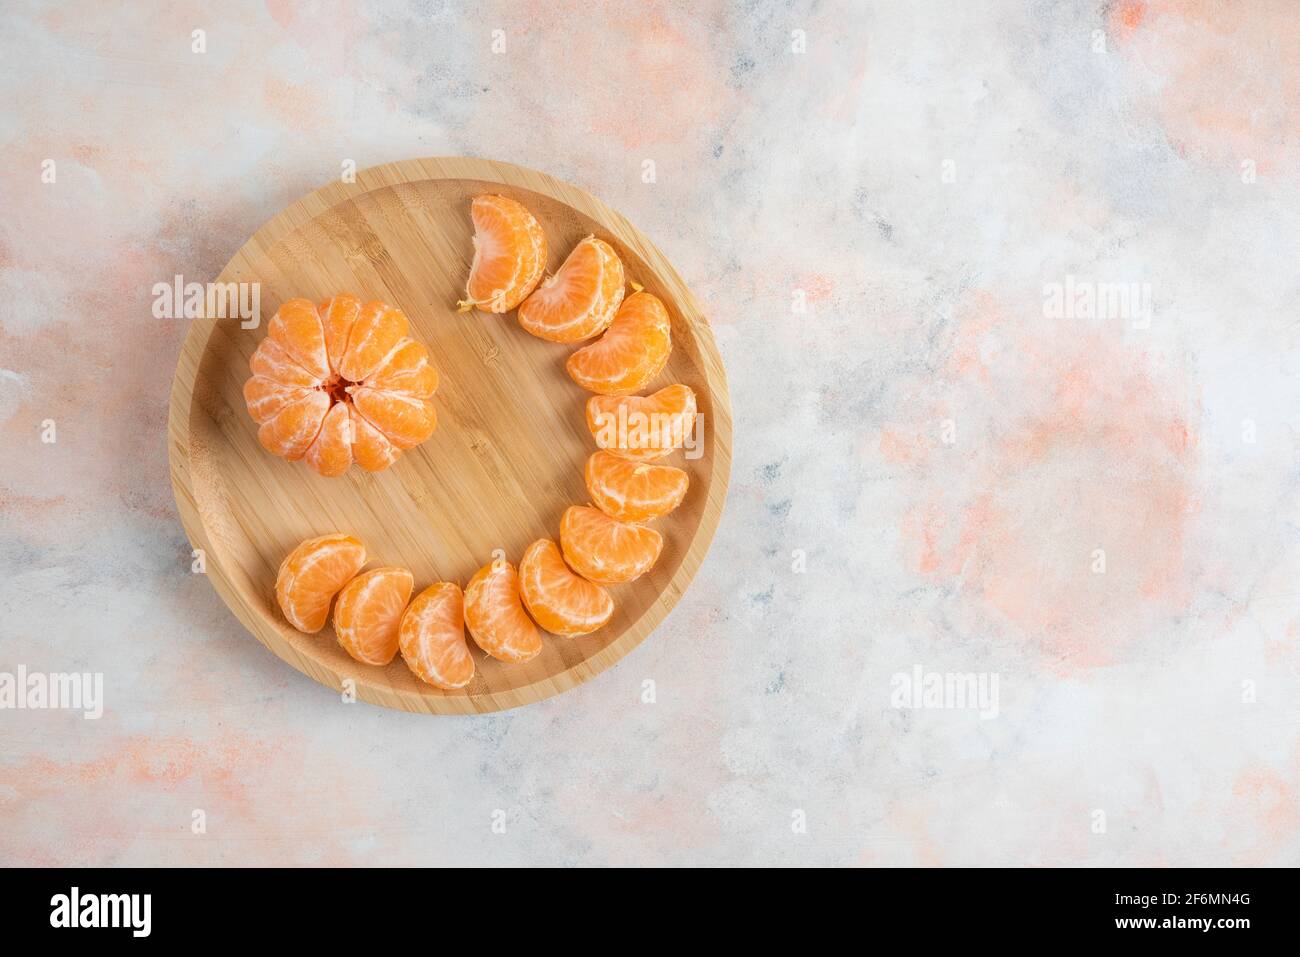 Top view of peeled clementine mandarins over colorful background Stock Photo